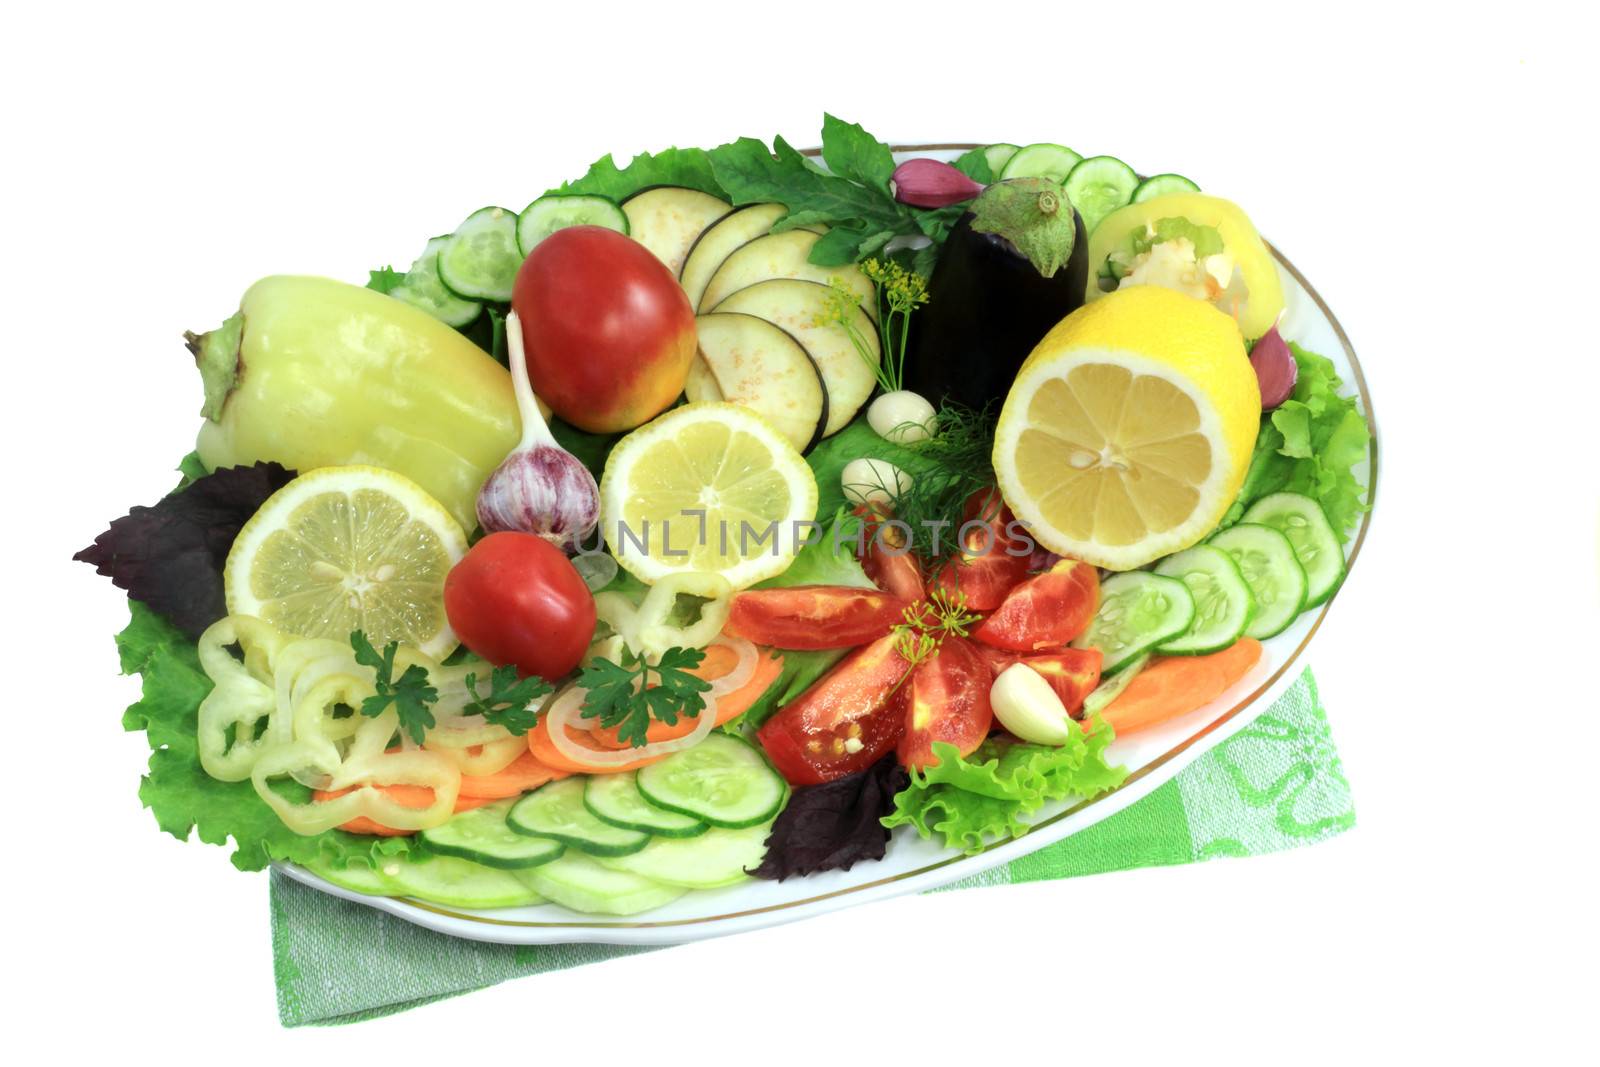 A variety of chopped vegetables and fruits, located on a ceramic dish. Presented on a white background.